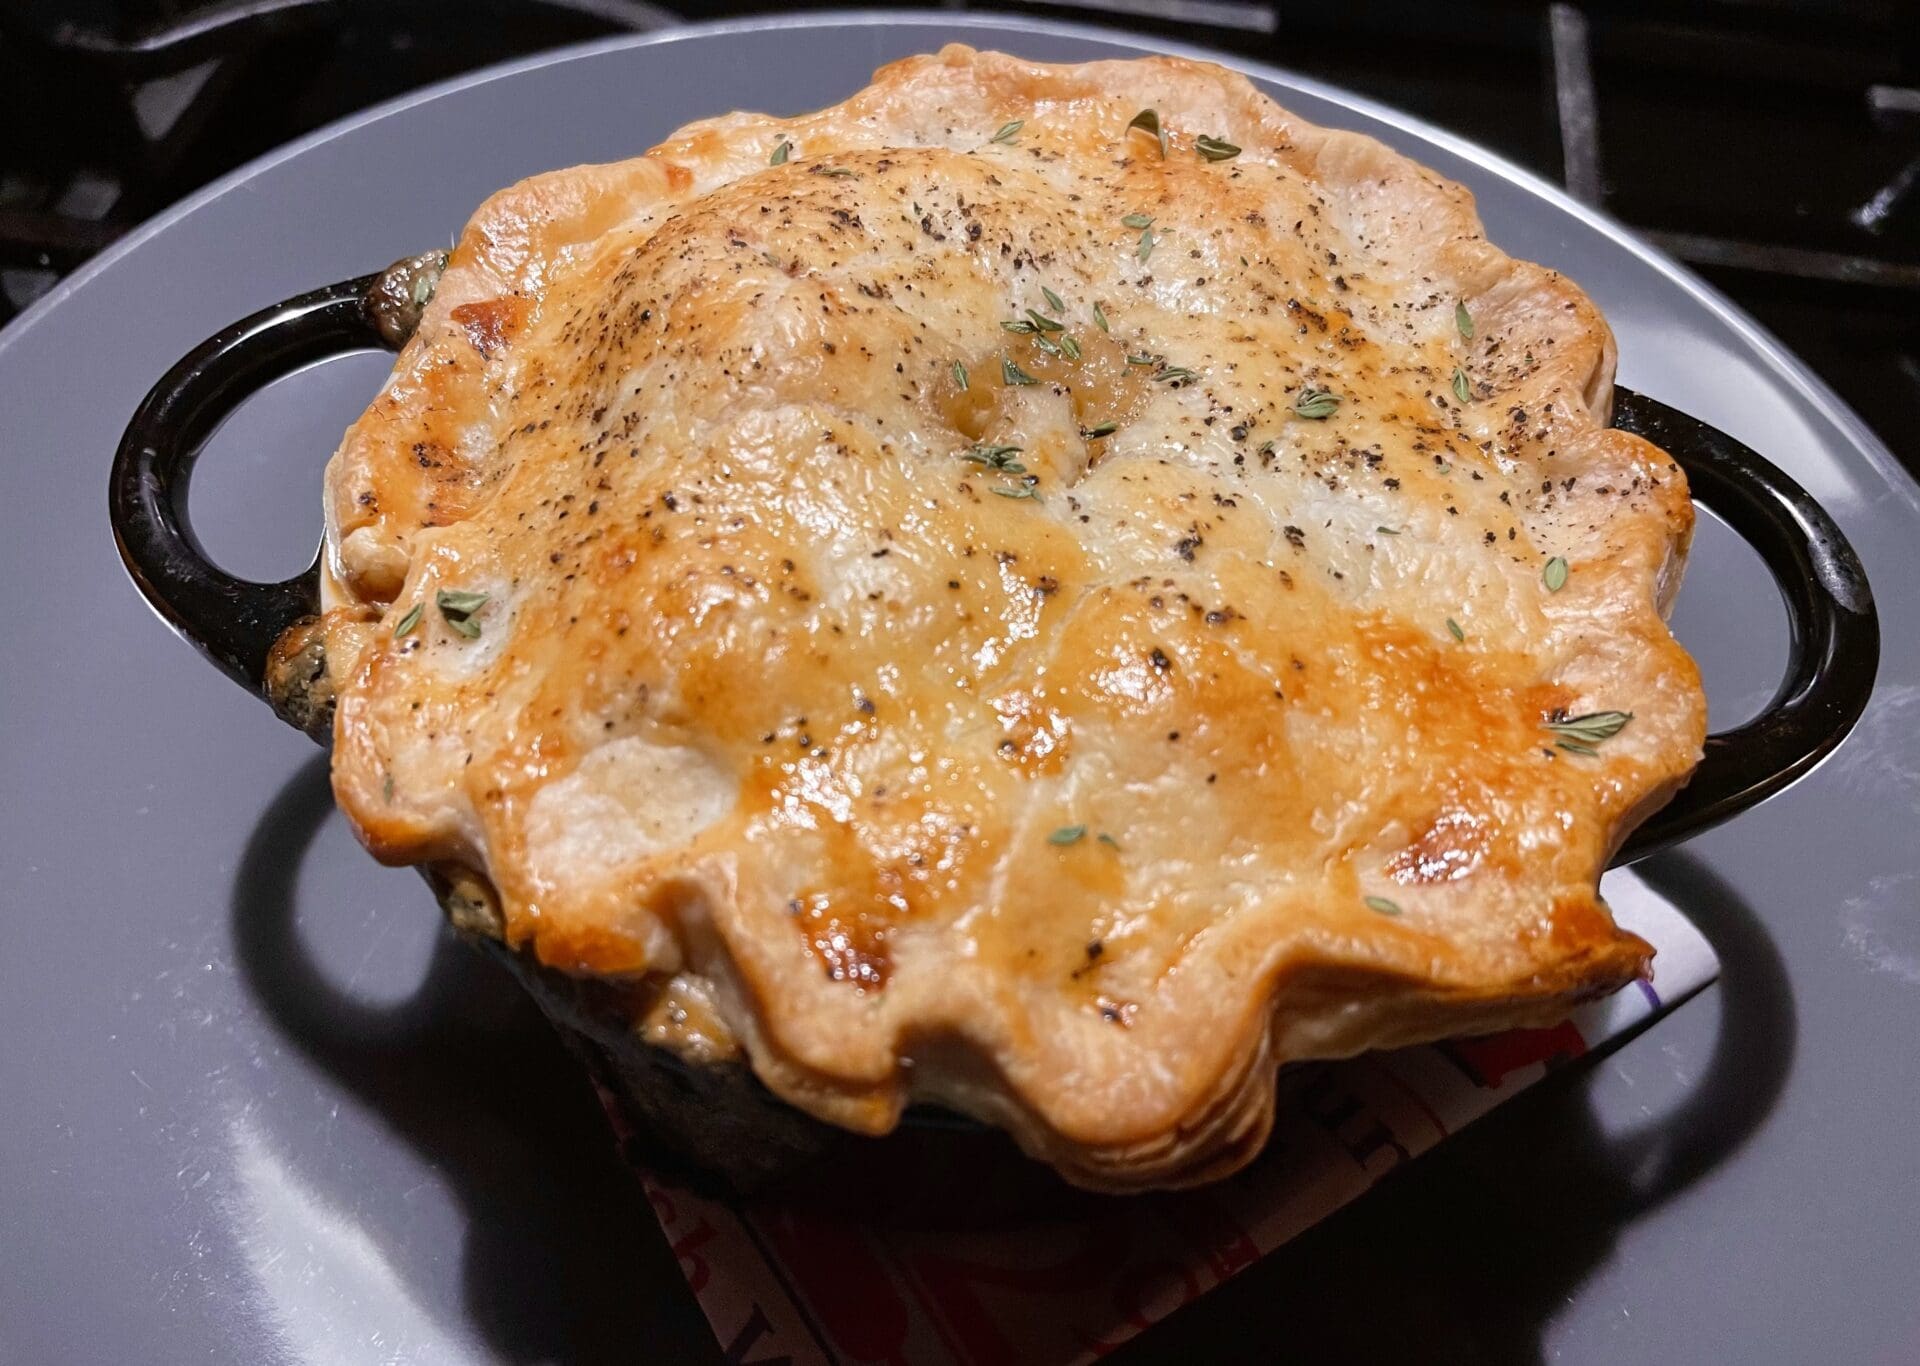 A pot pie sitting on top of a stove.